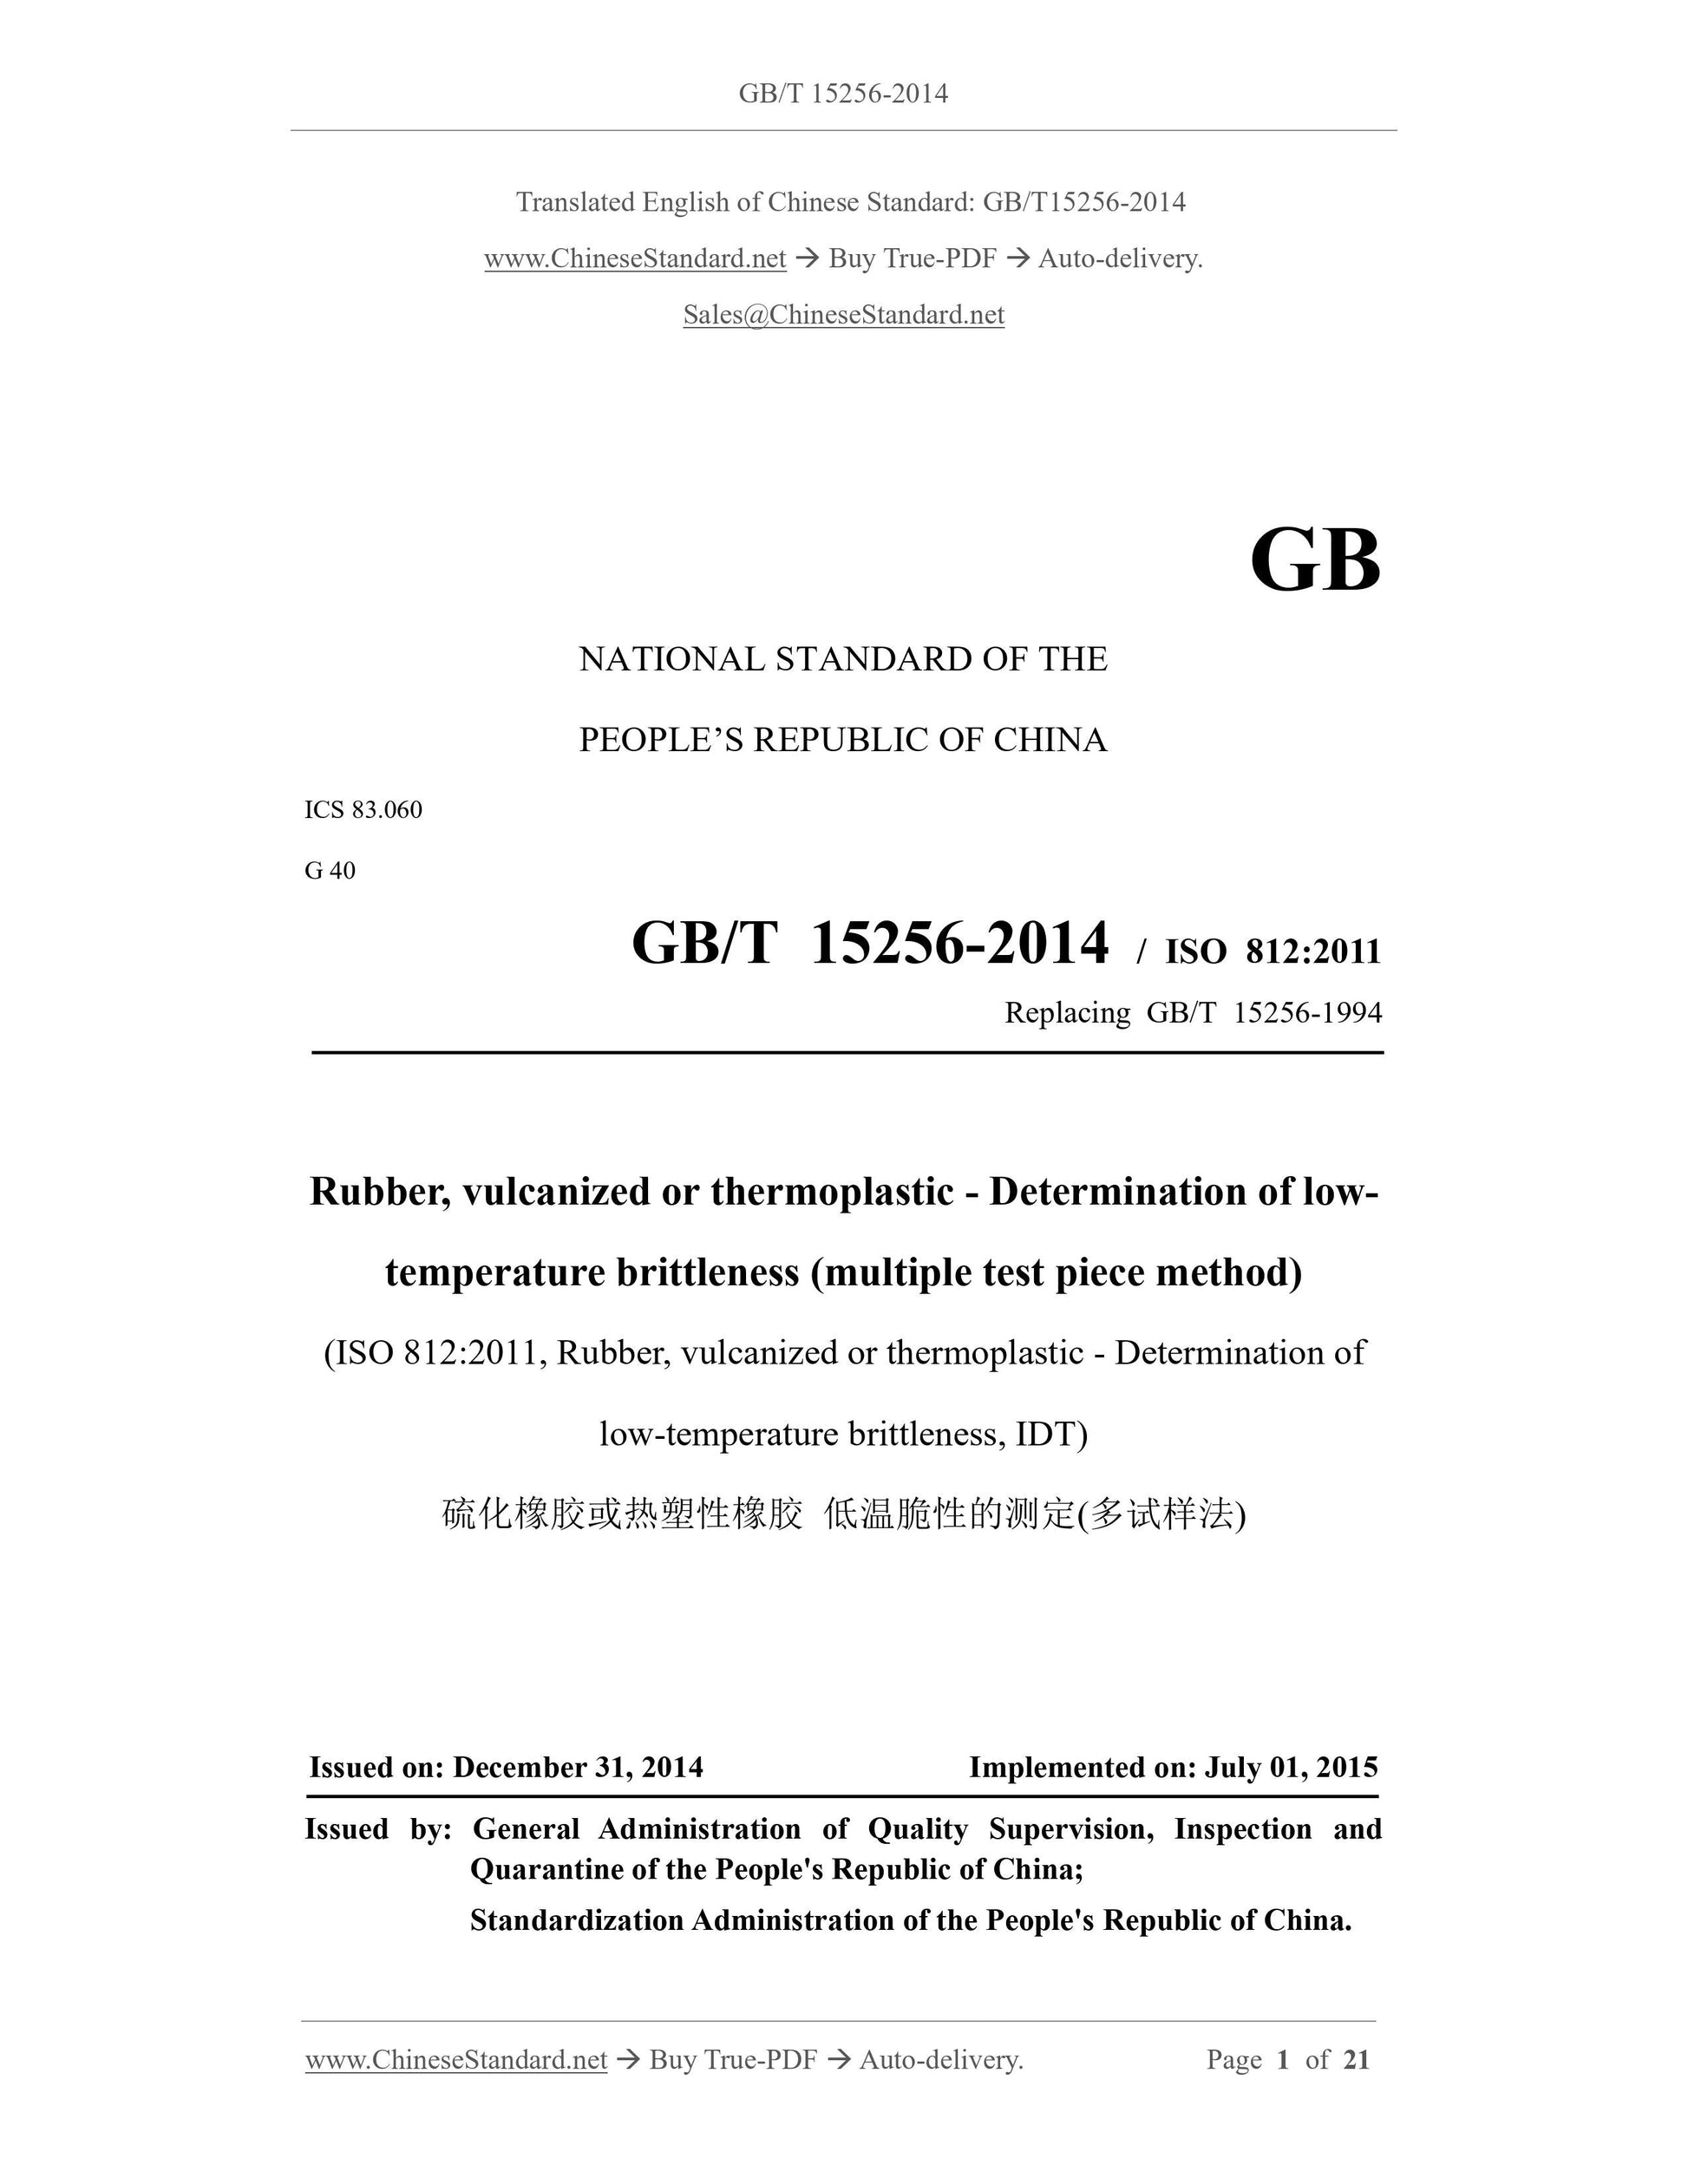 GB/T 15256-2014 Page 1